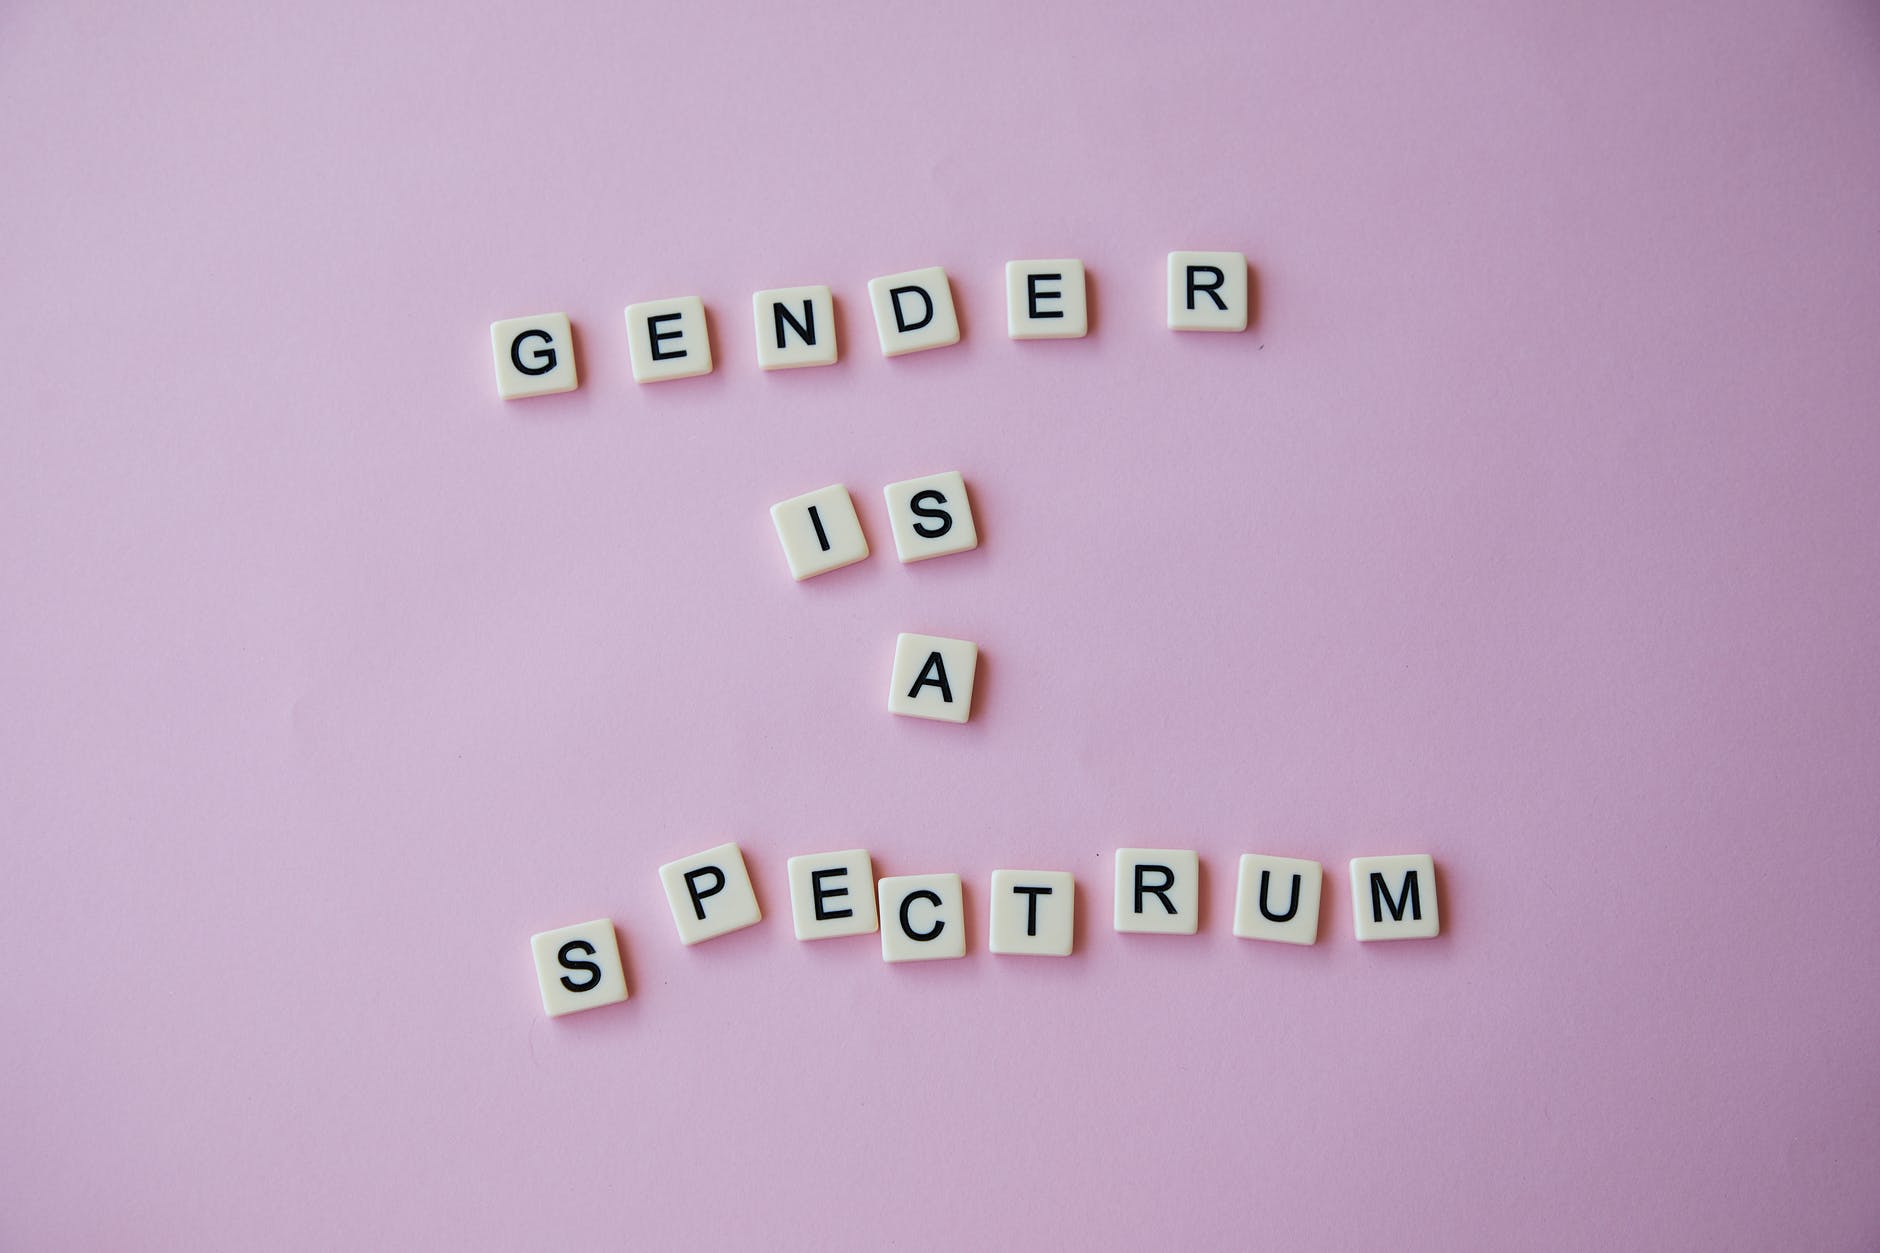 inscription gender is a spectrum made of scrabble letters against pink background